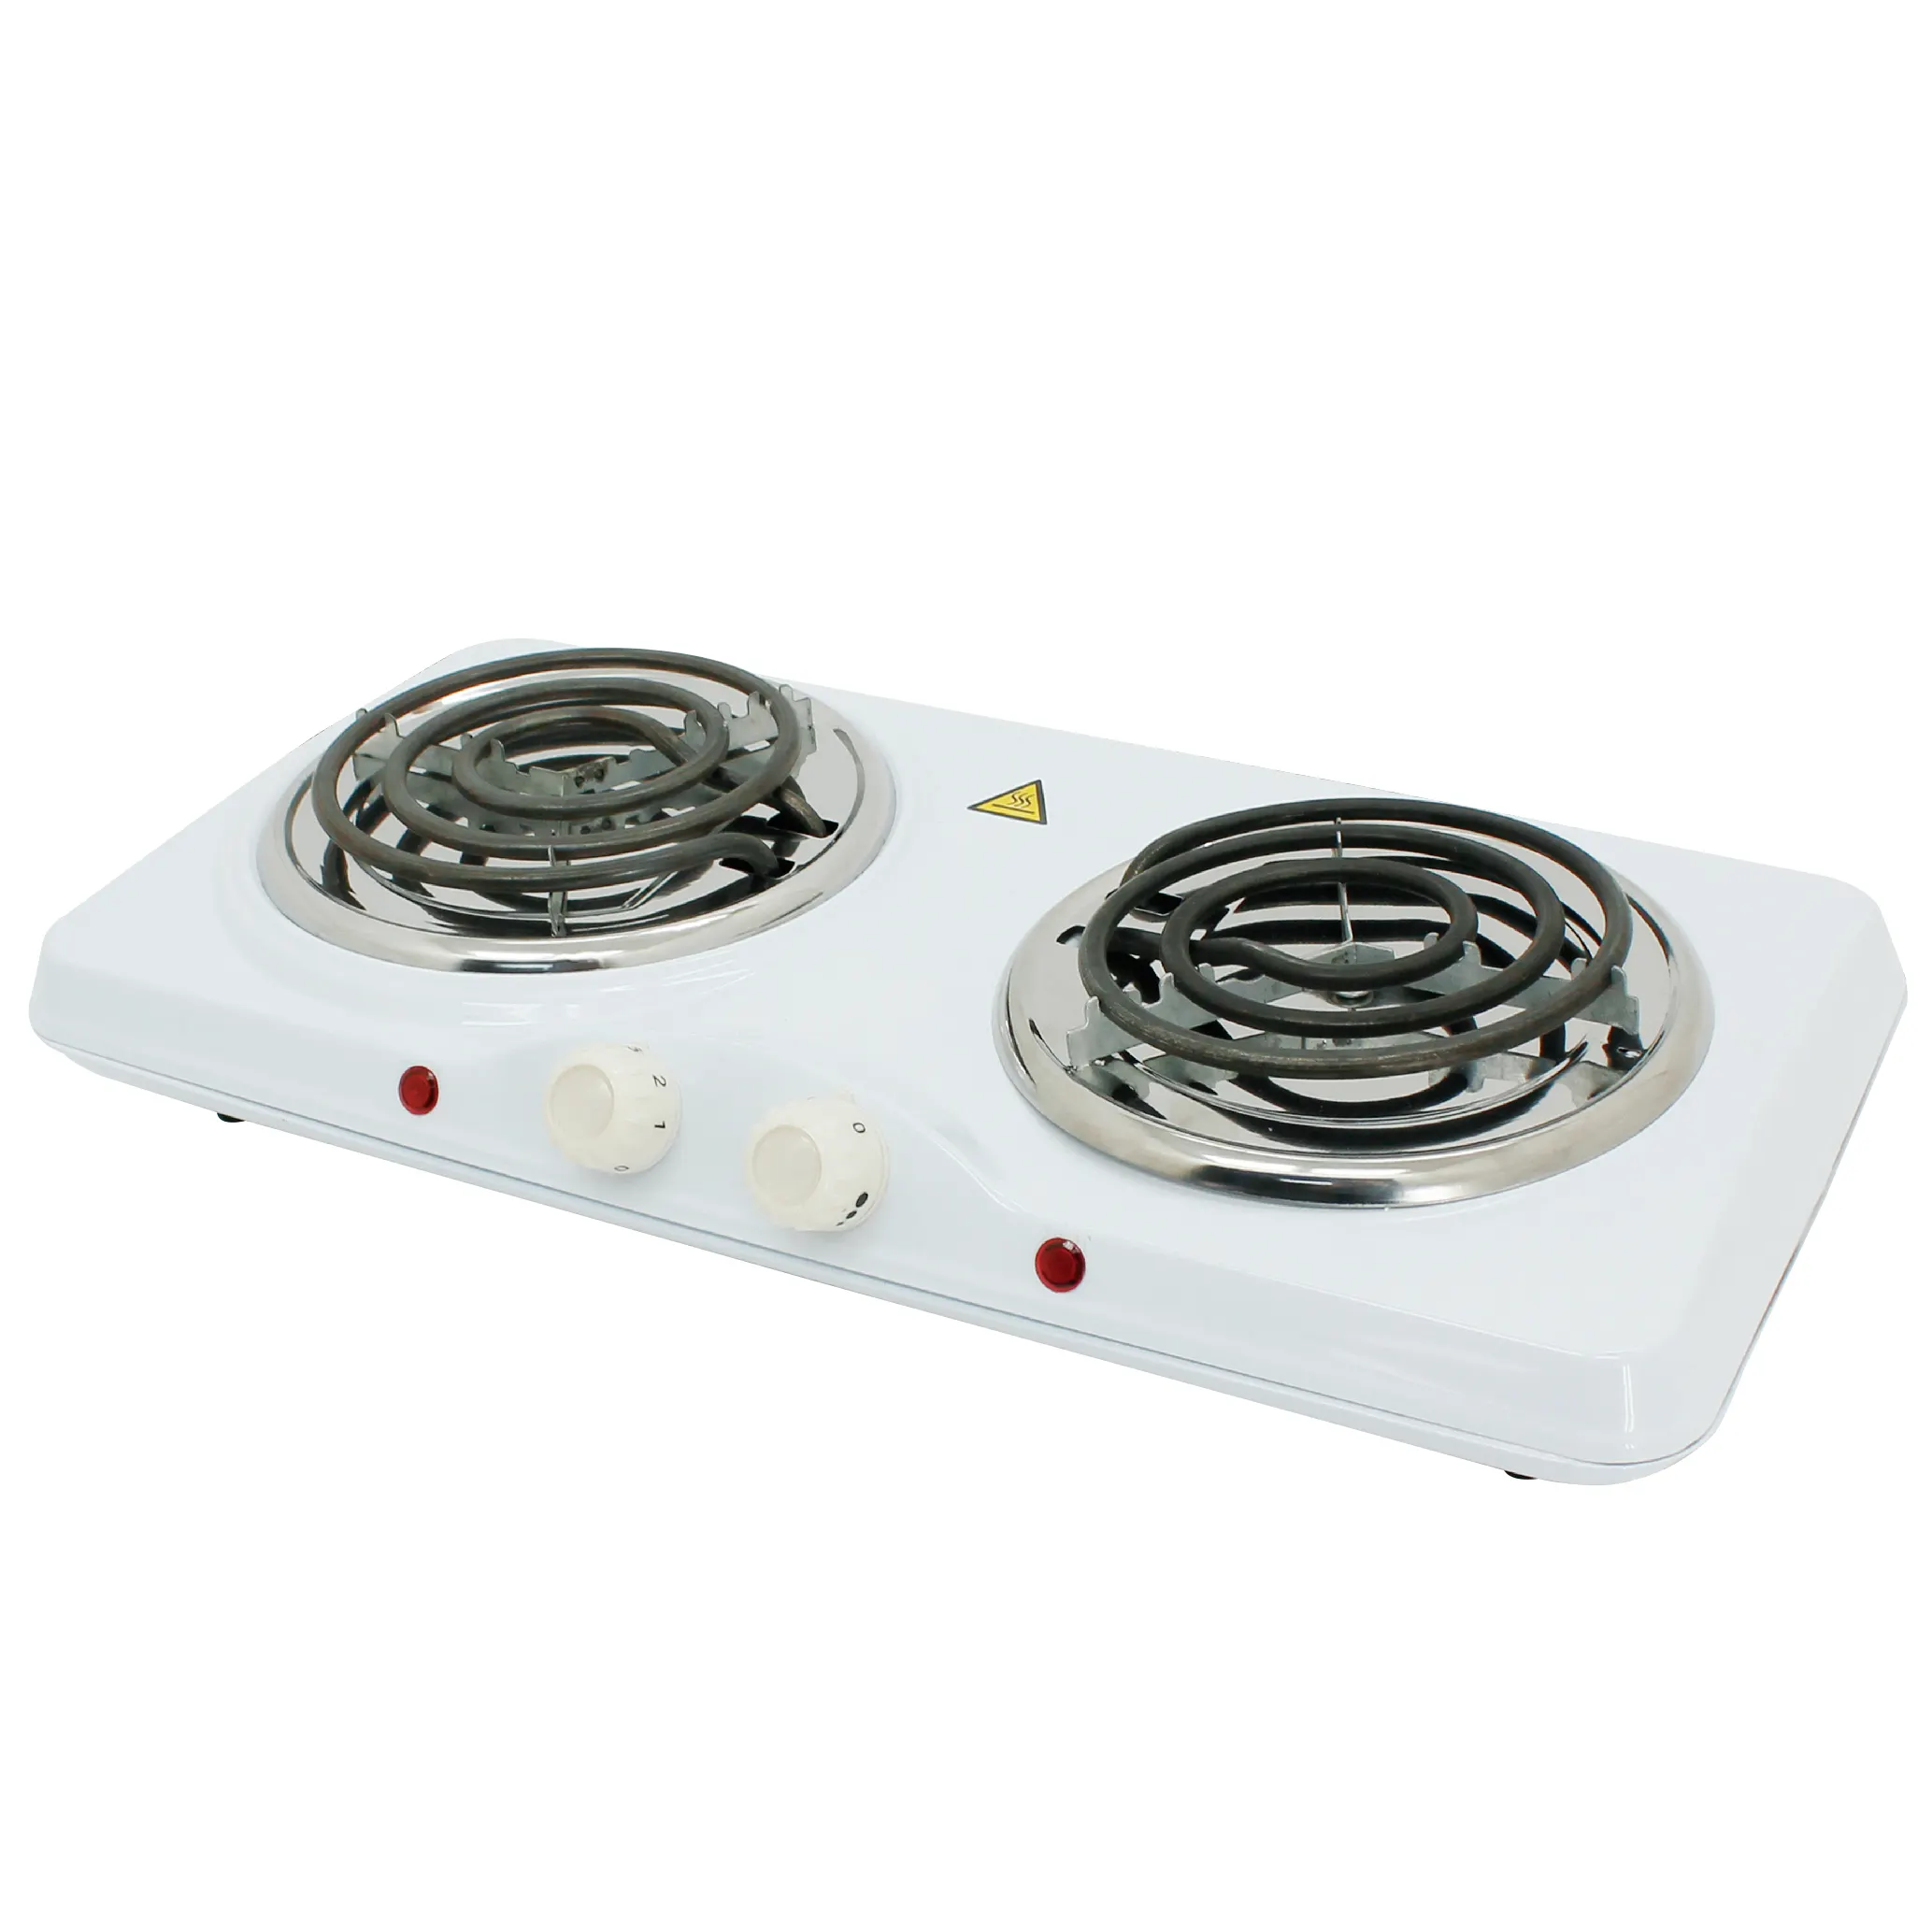 Best Quality Rotary Switch Home Kitchen Appliance Pot Electric Hot plates Stove For Cooking